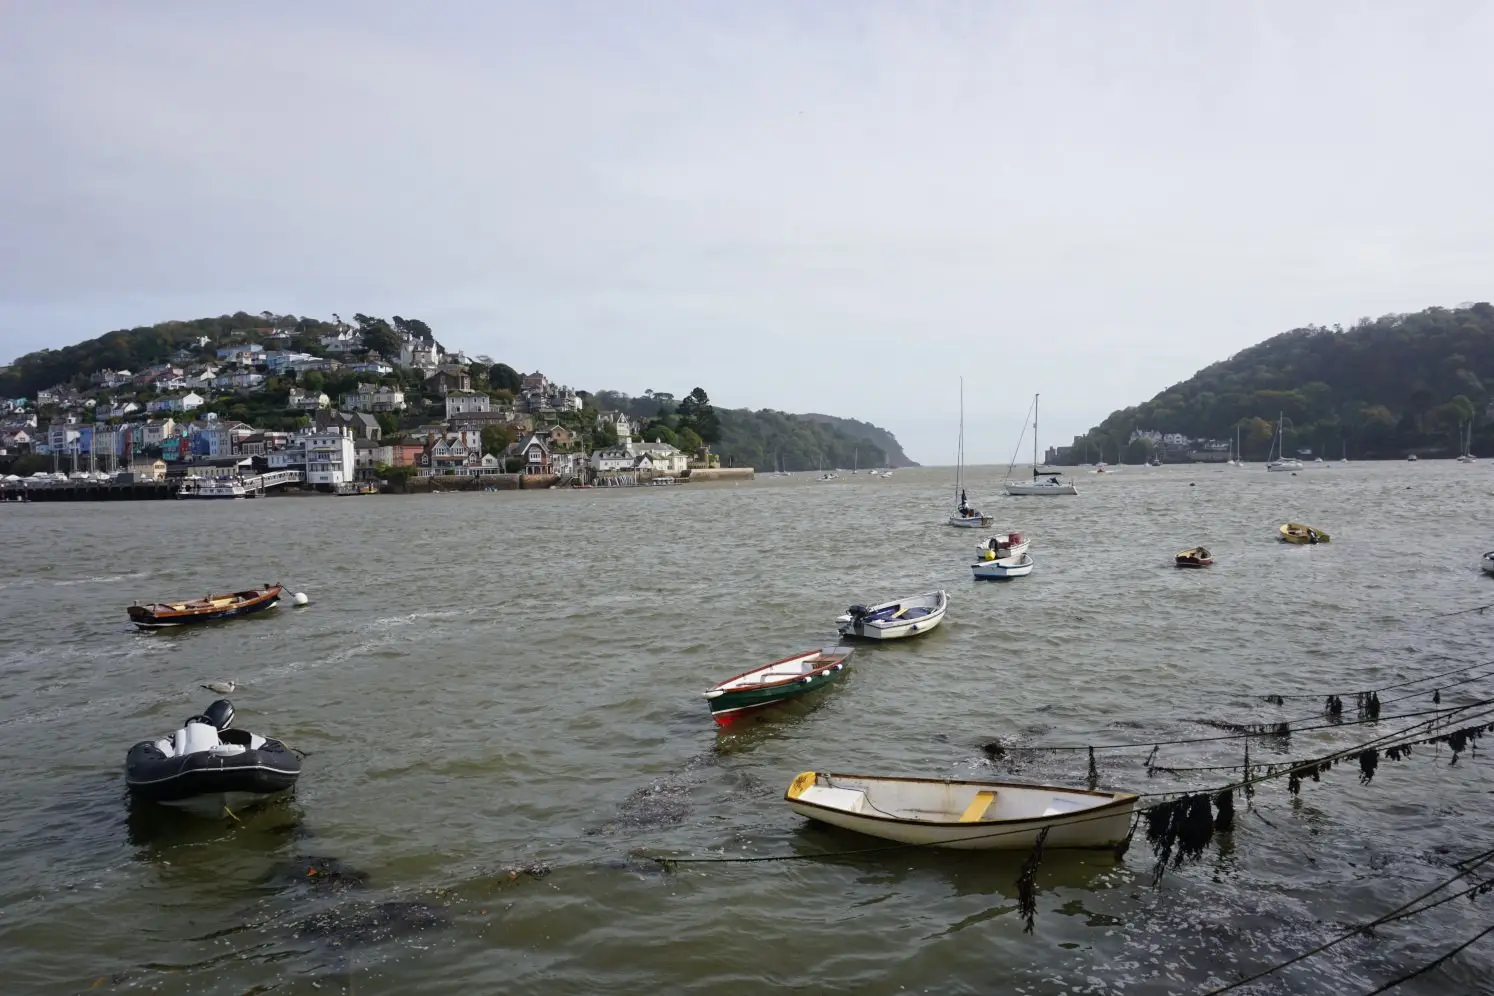 Dartmouth harbour with small boats and views of River Dart estuary and Kingwear town